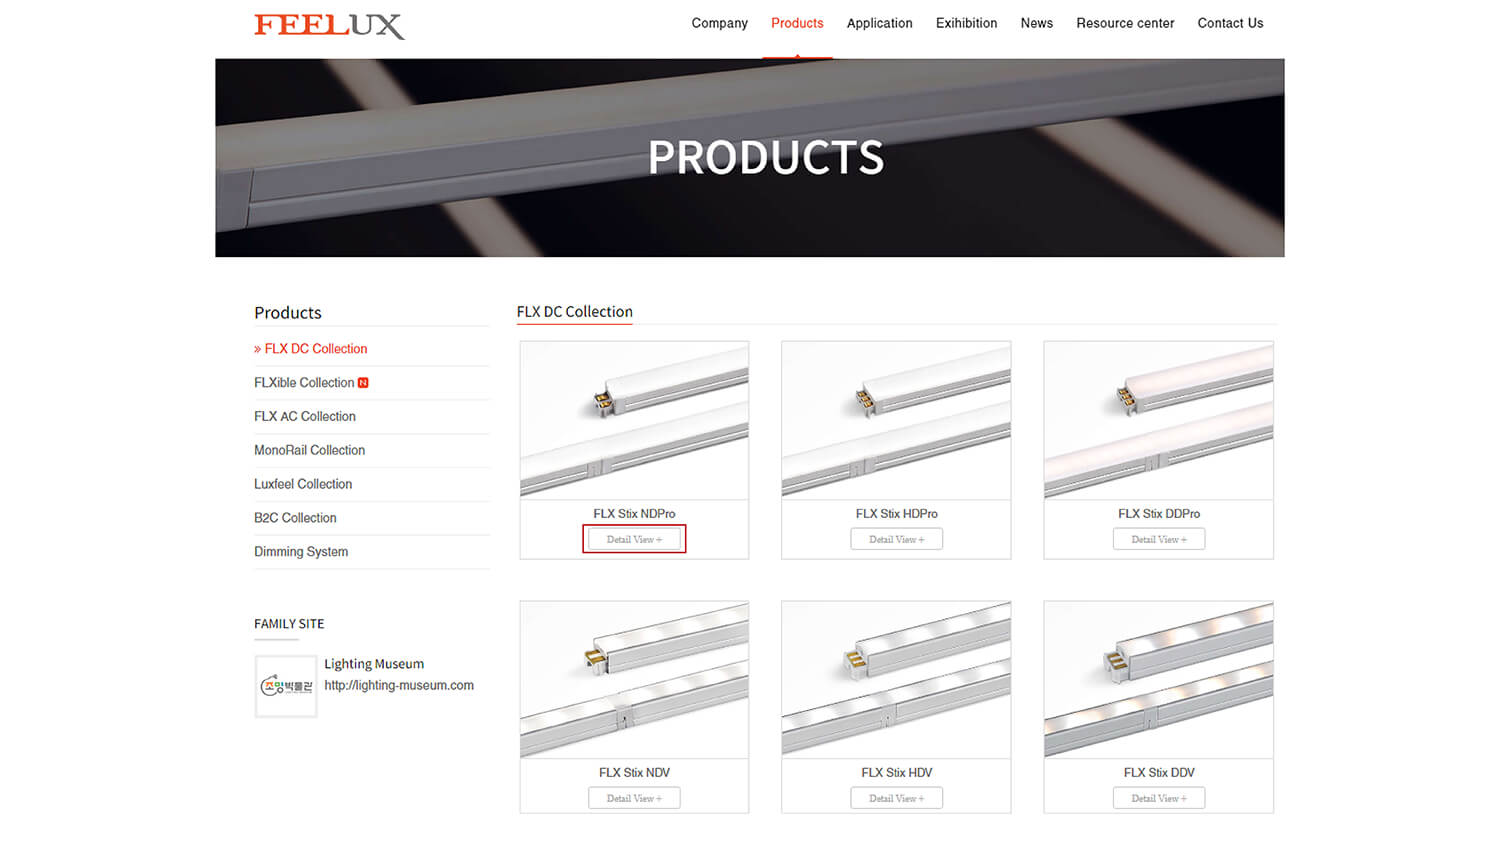 Step 1: Locate the luminaire you are looking for. Click on the DETAIL VIEW + button.